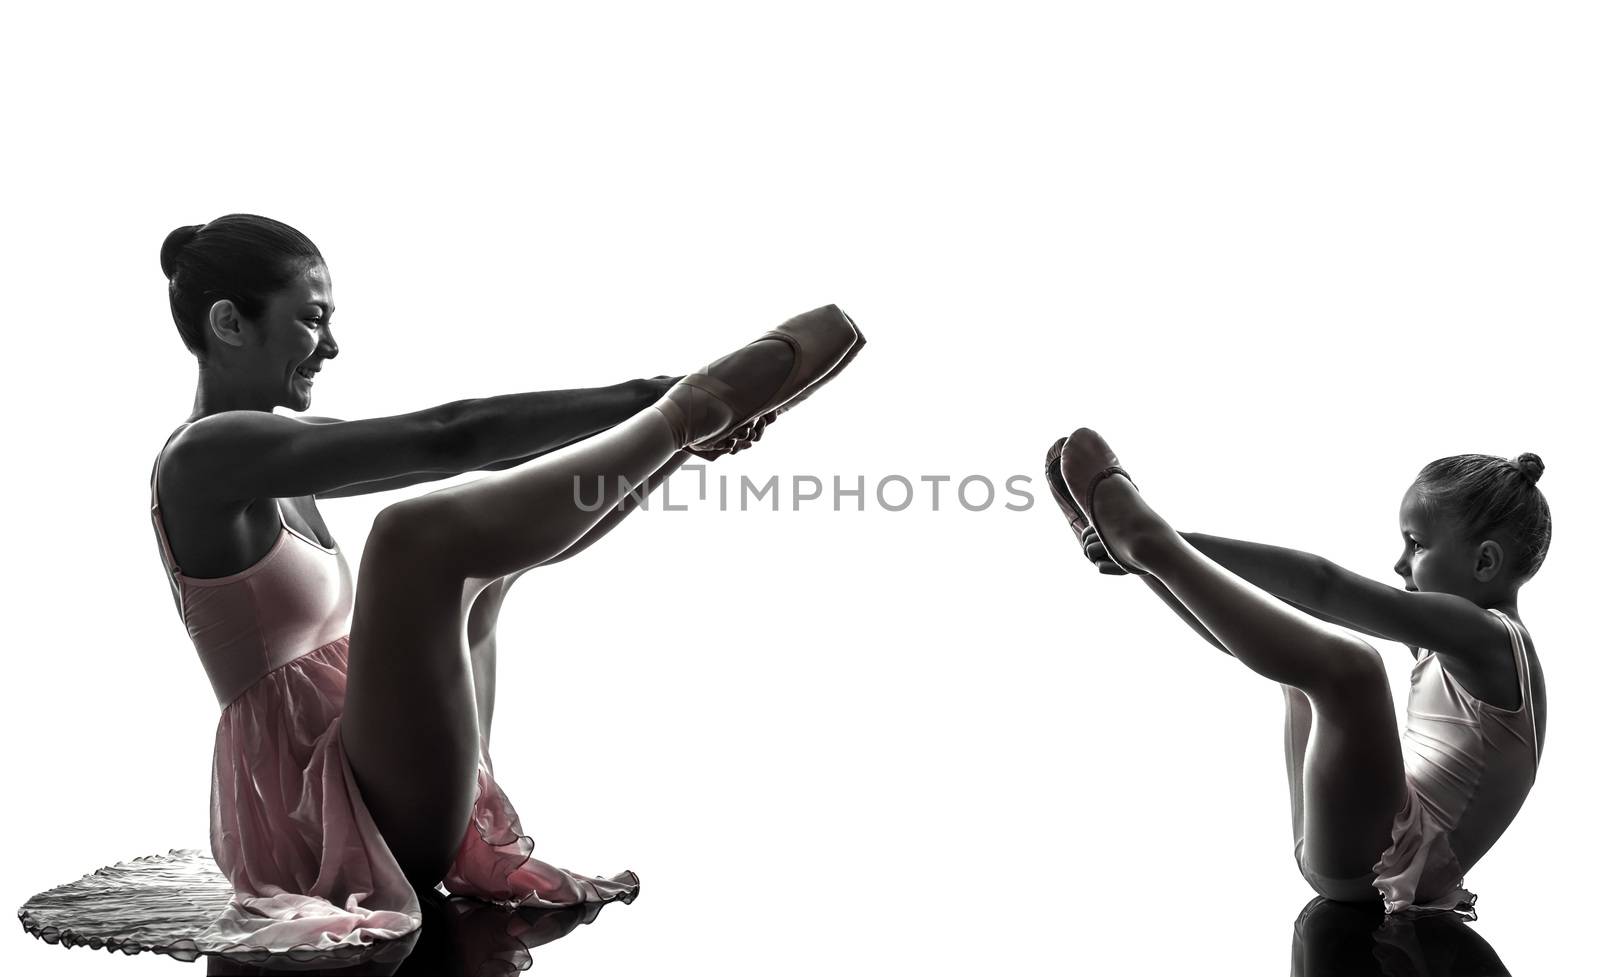 woman and  little girl   ballerina ballet dancer dancing in silhouette on white background